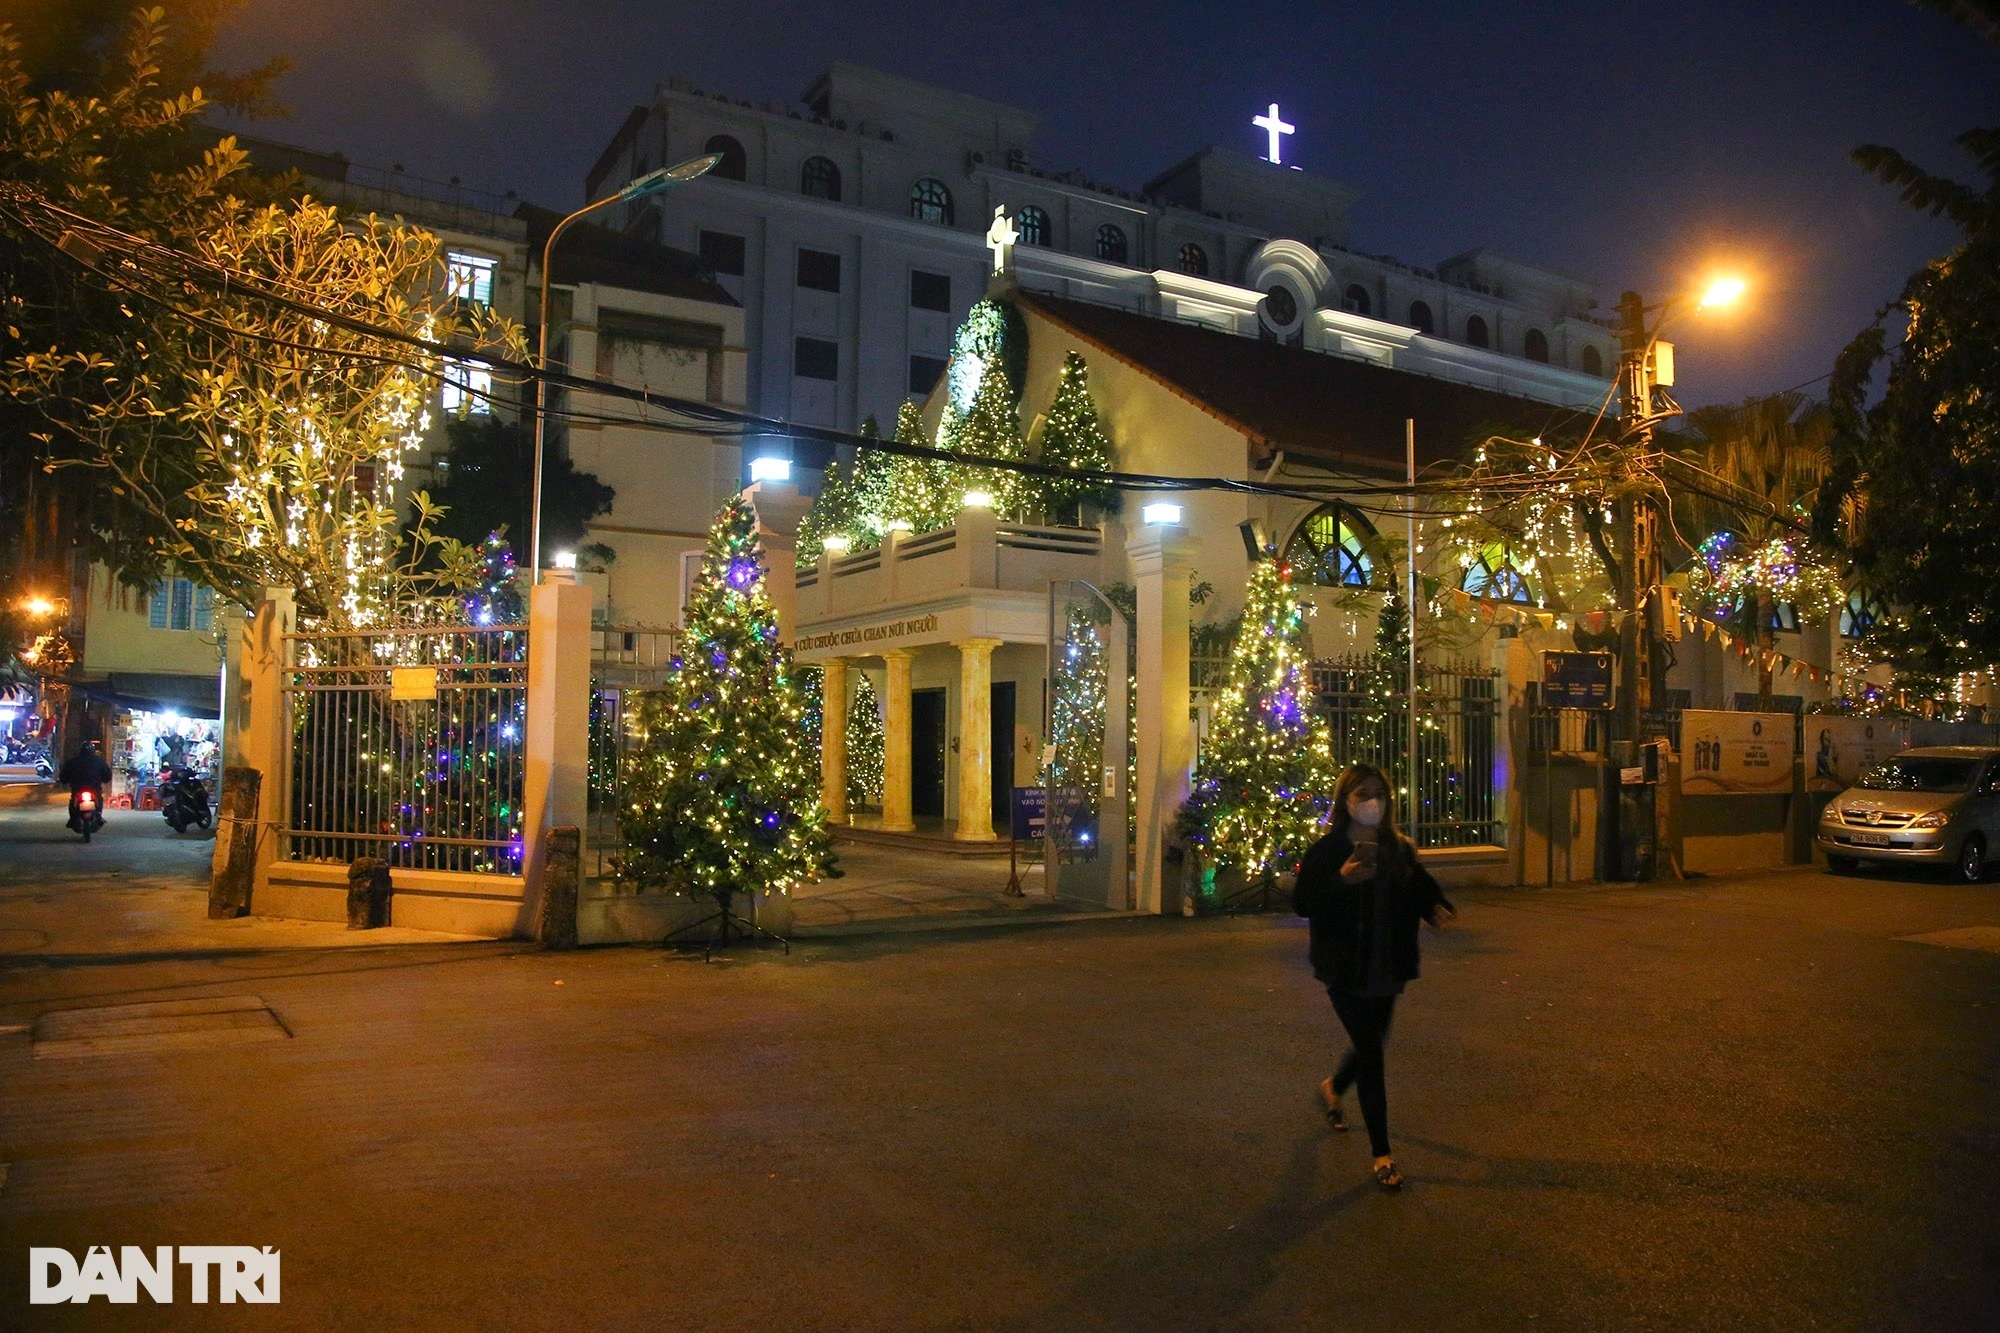 Churches in Hanoi are sparkling to welcome Christmas 2021 - 12